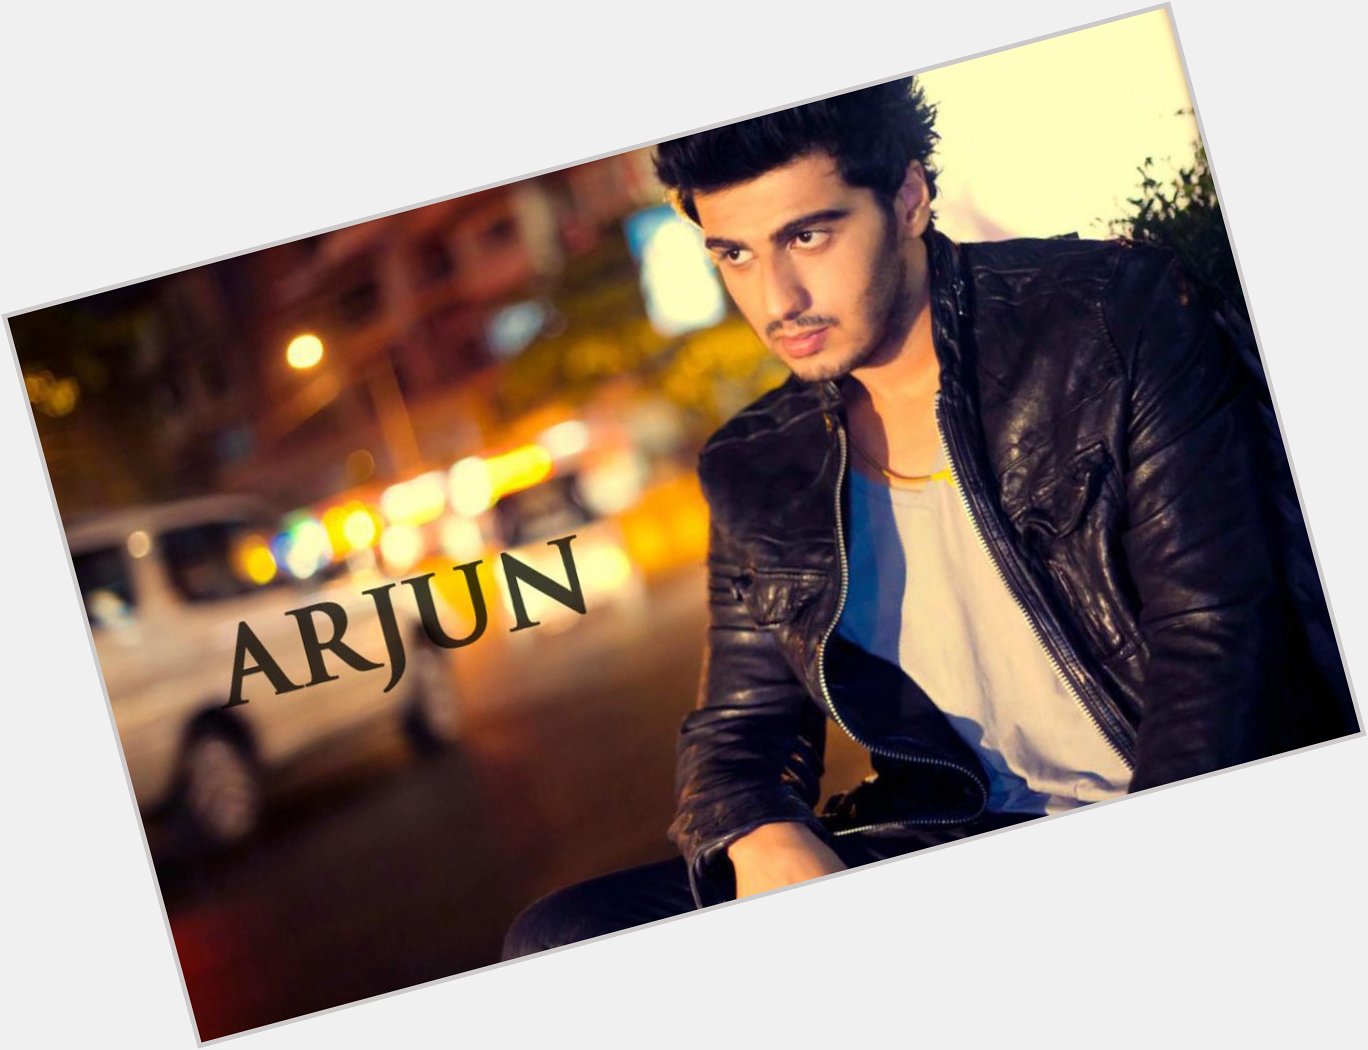 Wishing young and handsome Arjun Kapoor a very happy birthday. Have a blessed year. 